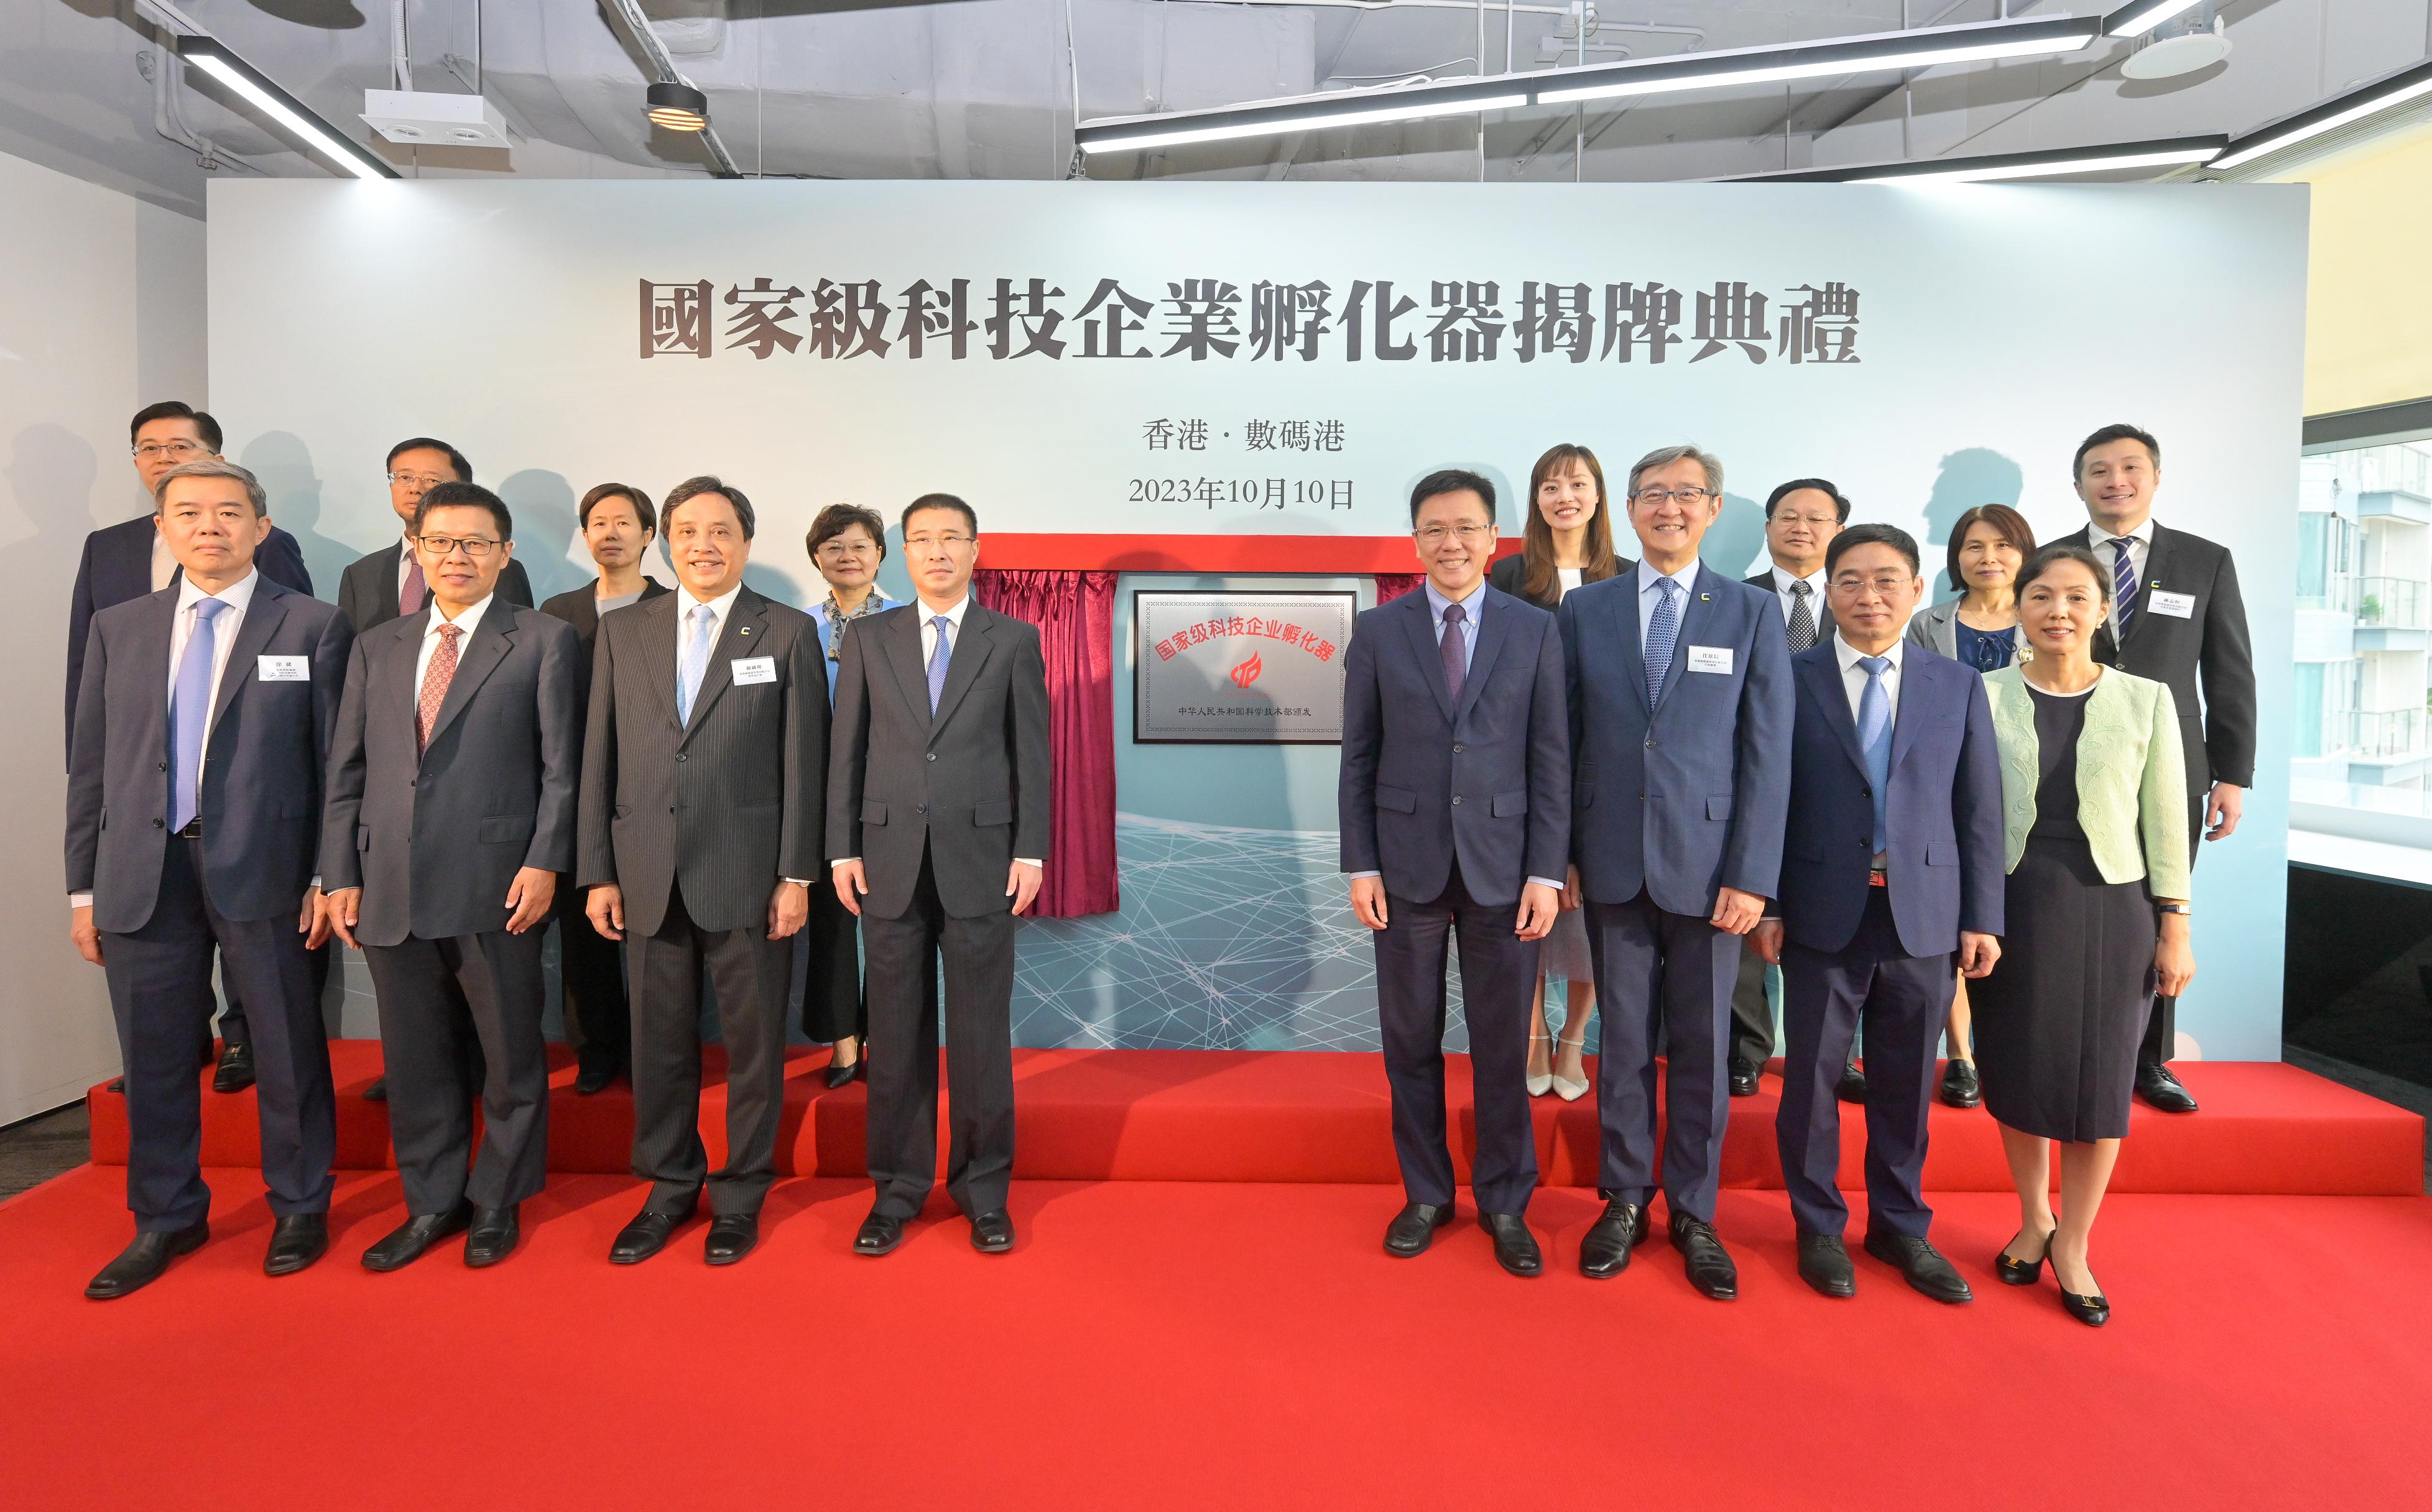 The Secretary for Innovation, Technology and Industry, Professor Sun Dong, attended the plaque unveiling ceremony today (October 10) to mark the Hong Kong Cyberport Management Company Limited (HKCMCL) being formally awarded as a State-level Scientific and Technological Enterprise Incubator by the Ministry of Science and Technology. Photo shows Professor Sun Dong (front row, fourth right); Vice Minister of Science and Technology Professor Zhang Guangjun (front row, fourth left); the Under Secretary for Innovation, Technology and Industry, Ms Lillian Cheong (back row, fourth right); the Chairman of the Board of Directors of the HKCMCL, Mr Simon Chan (front row, third left); the Chief Executive Officer of the HKCMCL, Mr Peter Yan (front row, third right), and other guests at the plaque unveiling ceremony.